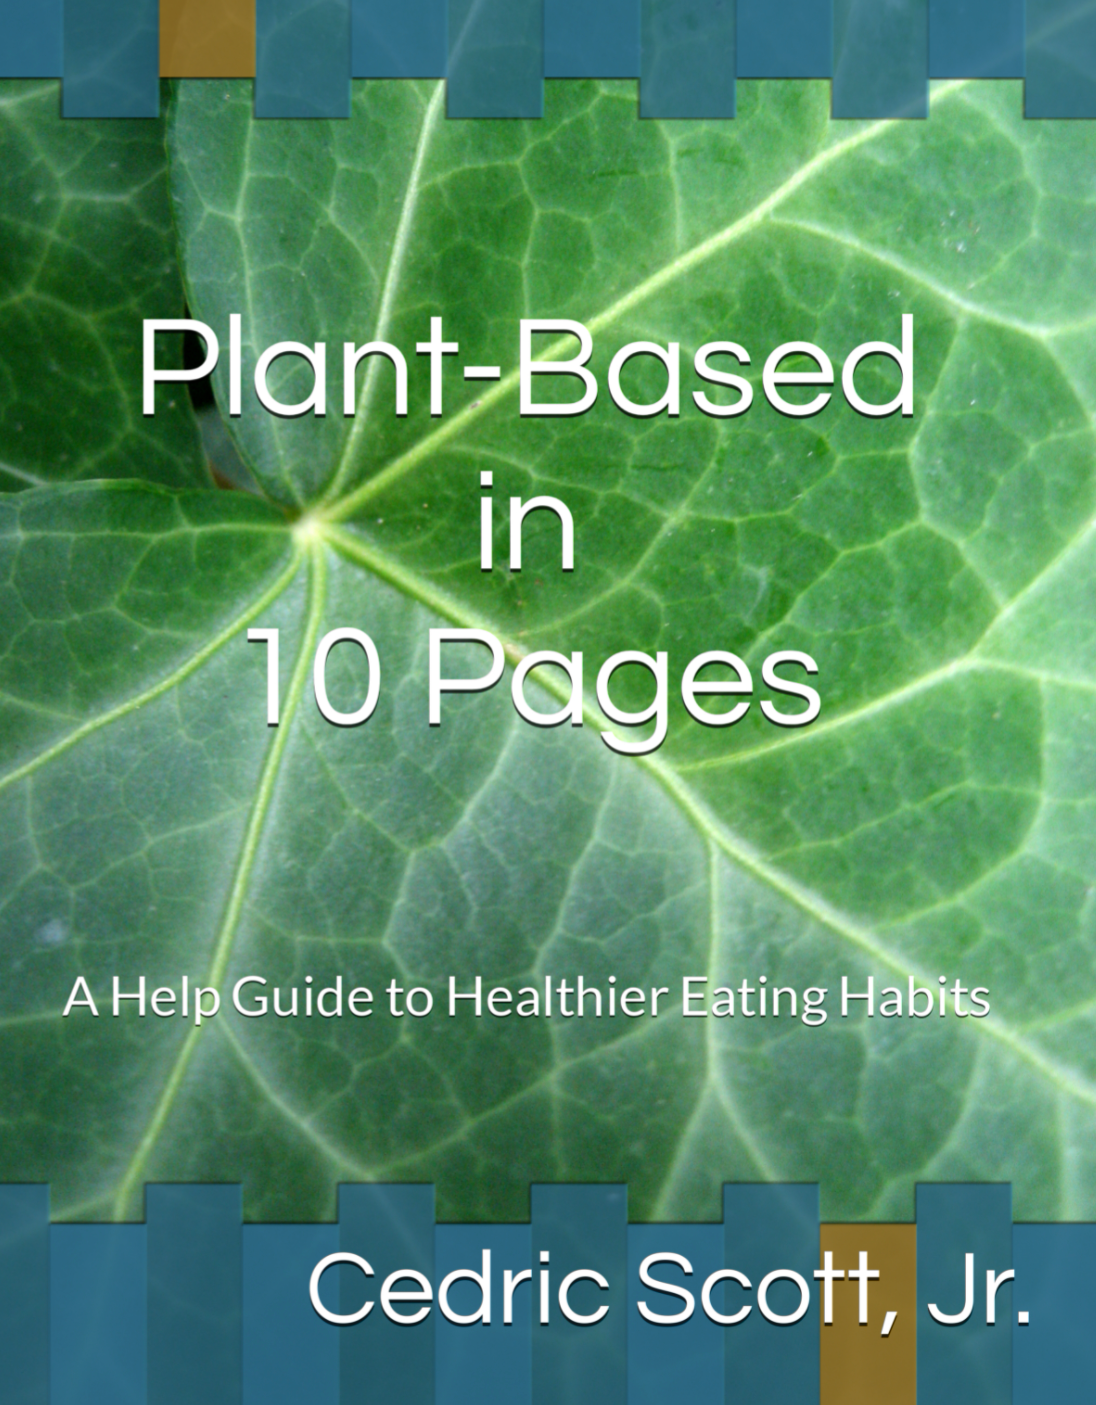 Plant-Based in 10 Pages: A Help Guide to Healthier Eating Habits (Ebook) - EDU HUSTLE